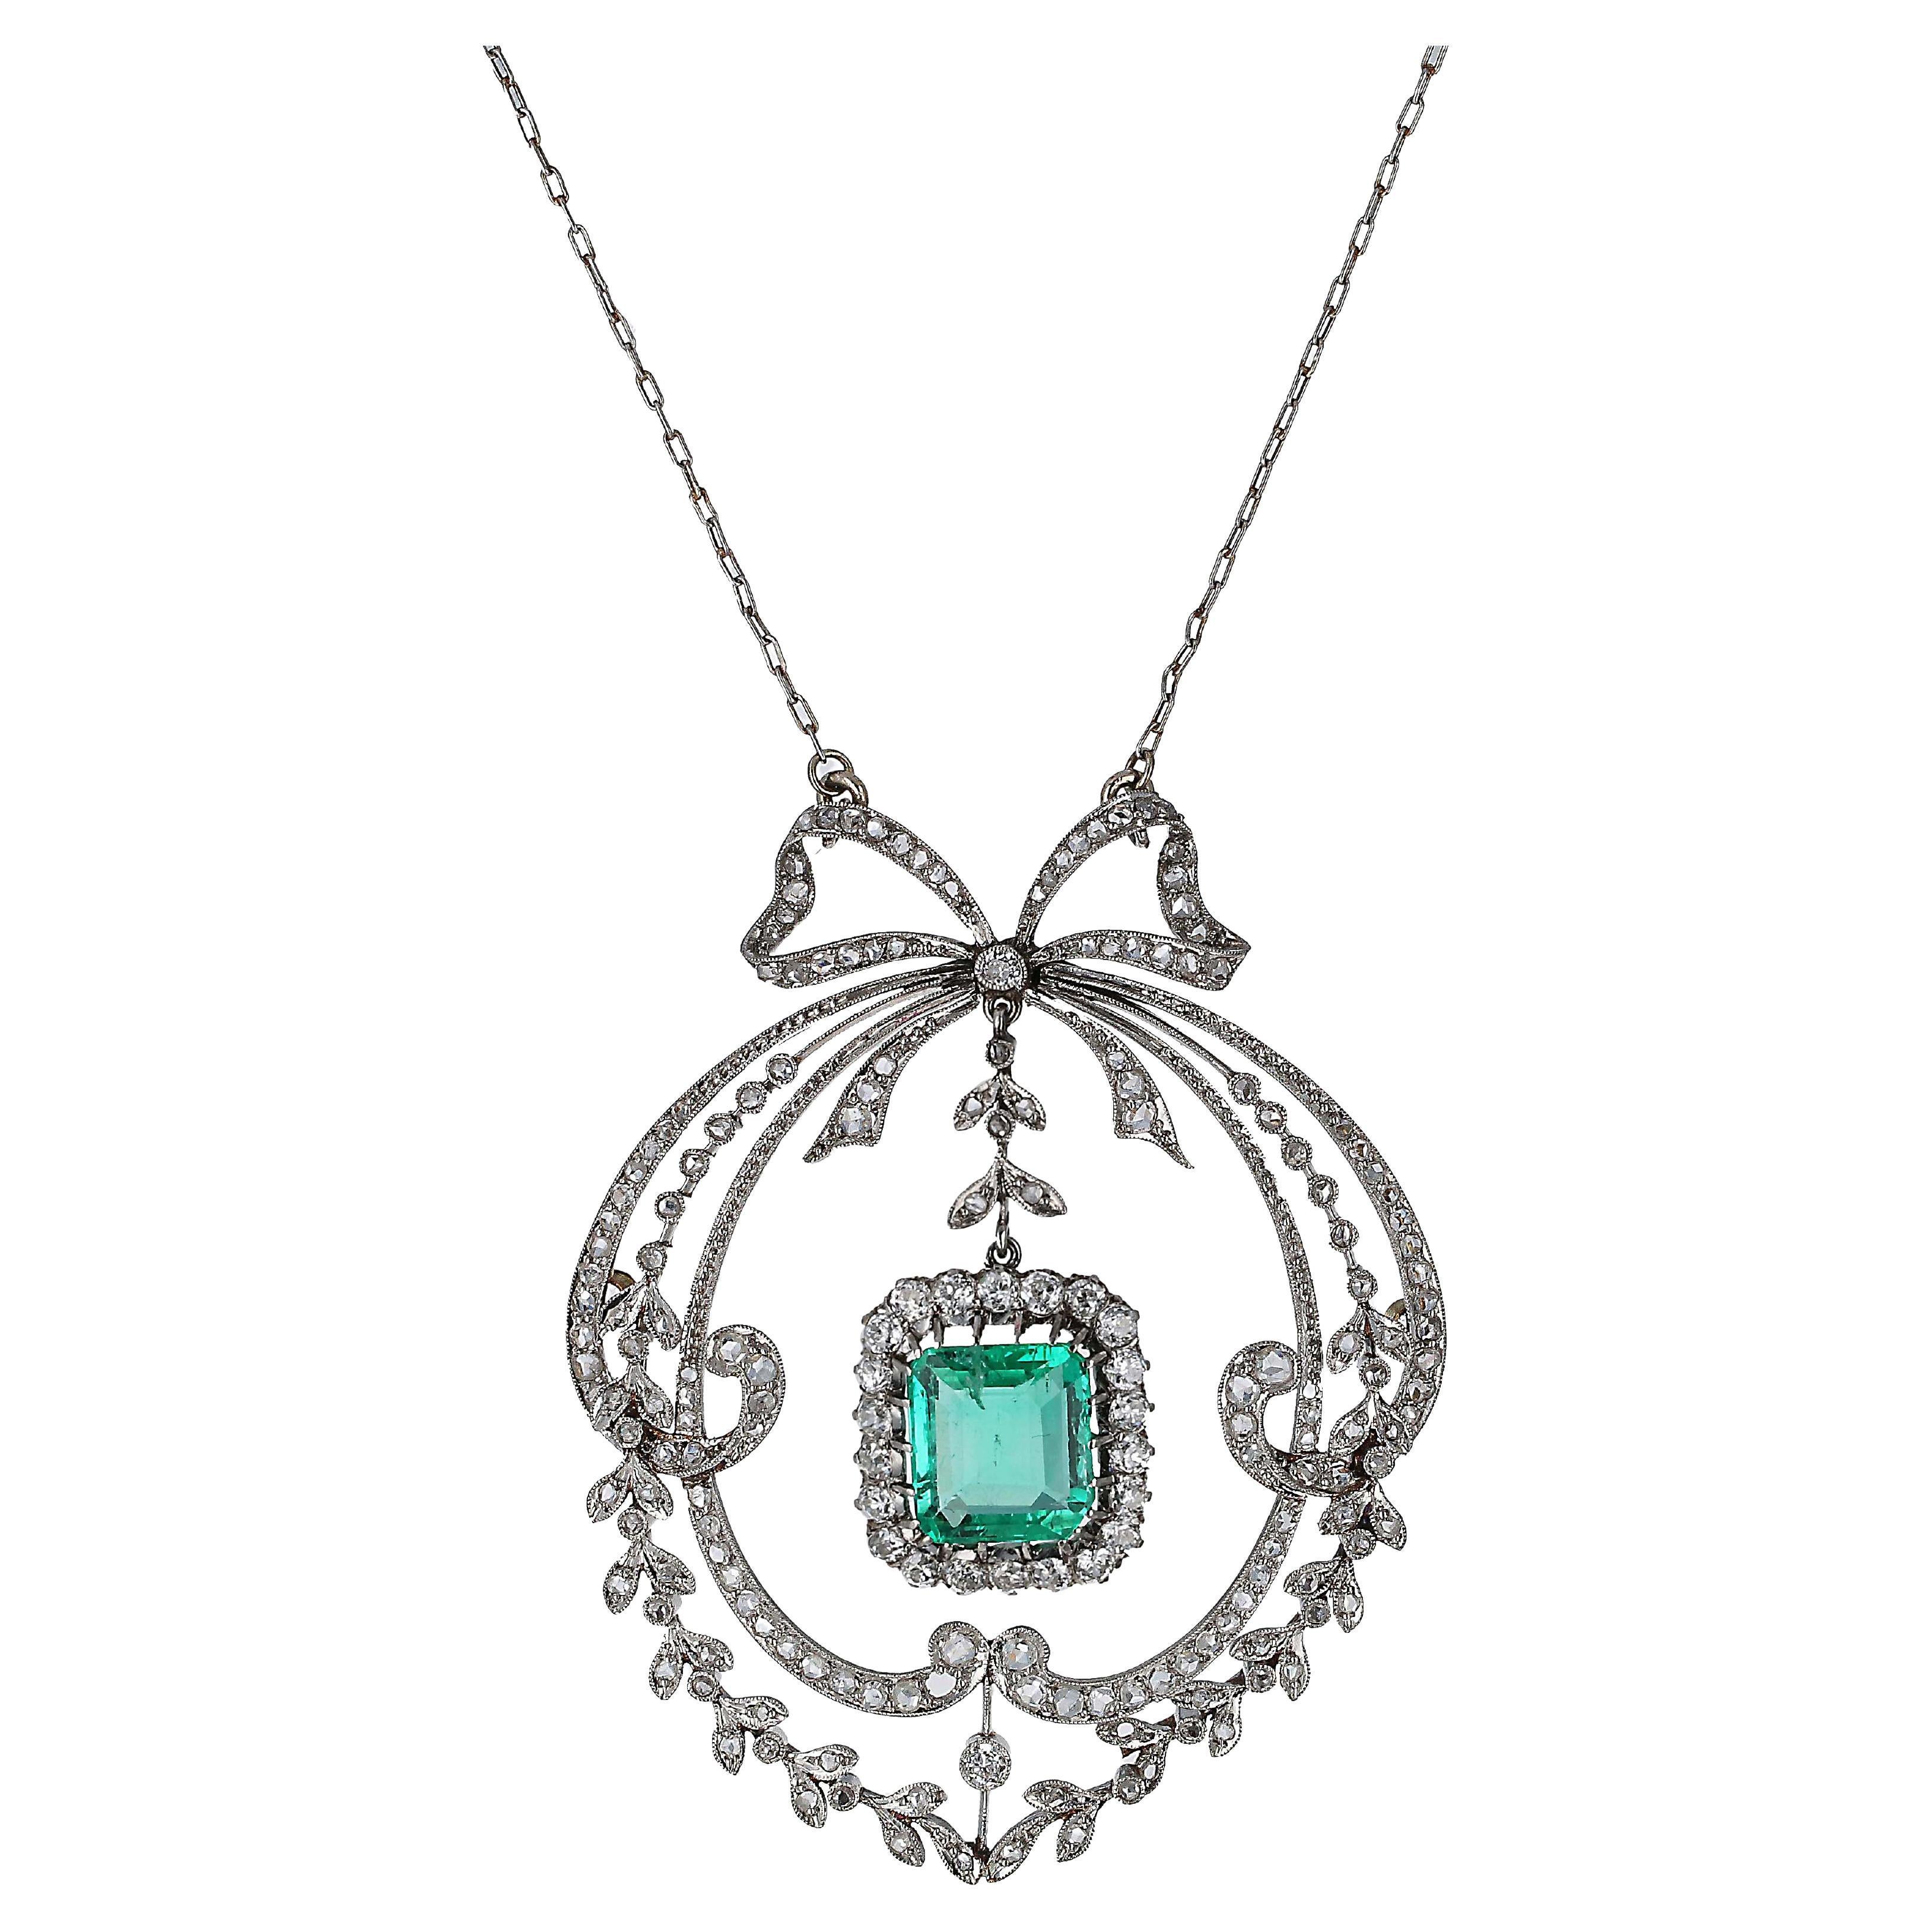 Platinum, white gold, Antique Edwardian diamond, and emerald pendant necklace. The edwardian era was called Belle époque (beautiful era) in France.
The delicate center emerald weighs 3.29 carats and is an old emerald cut. A combination of Old